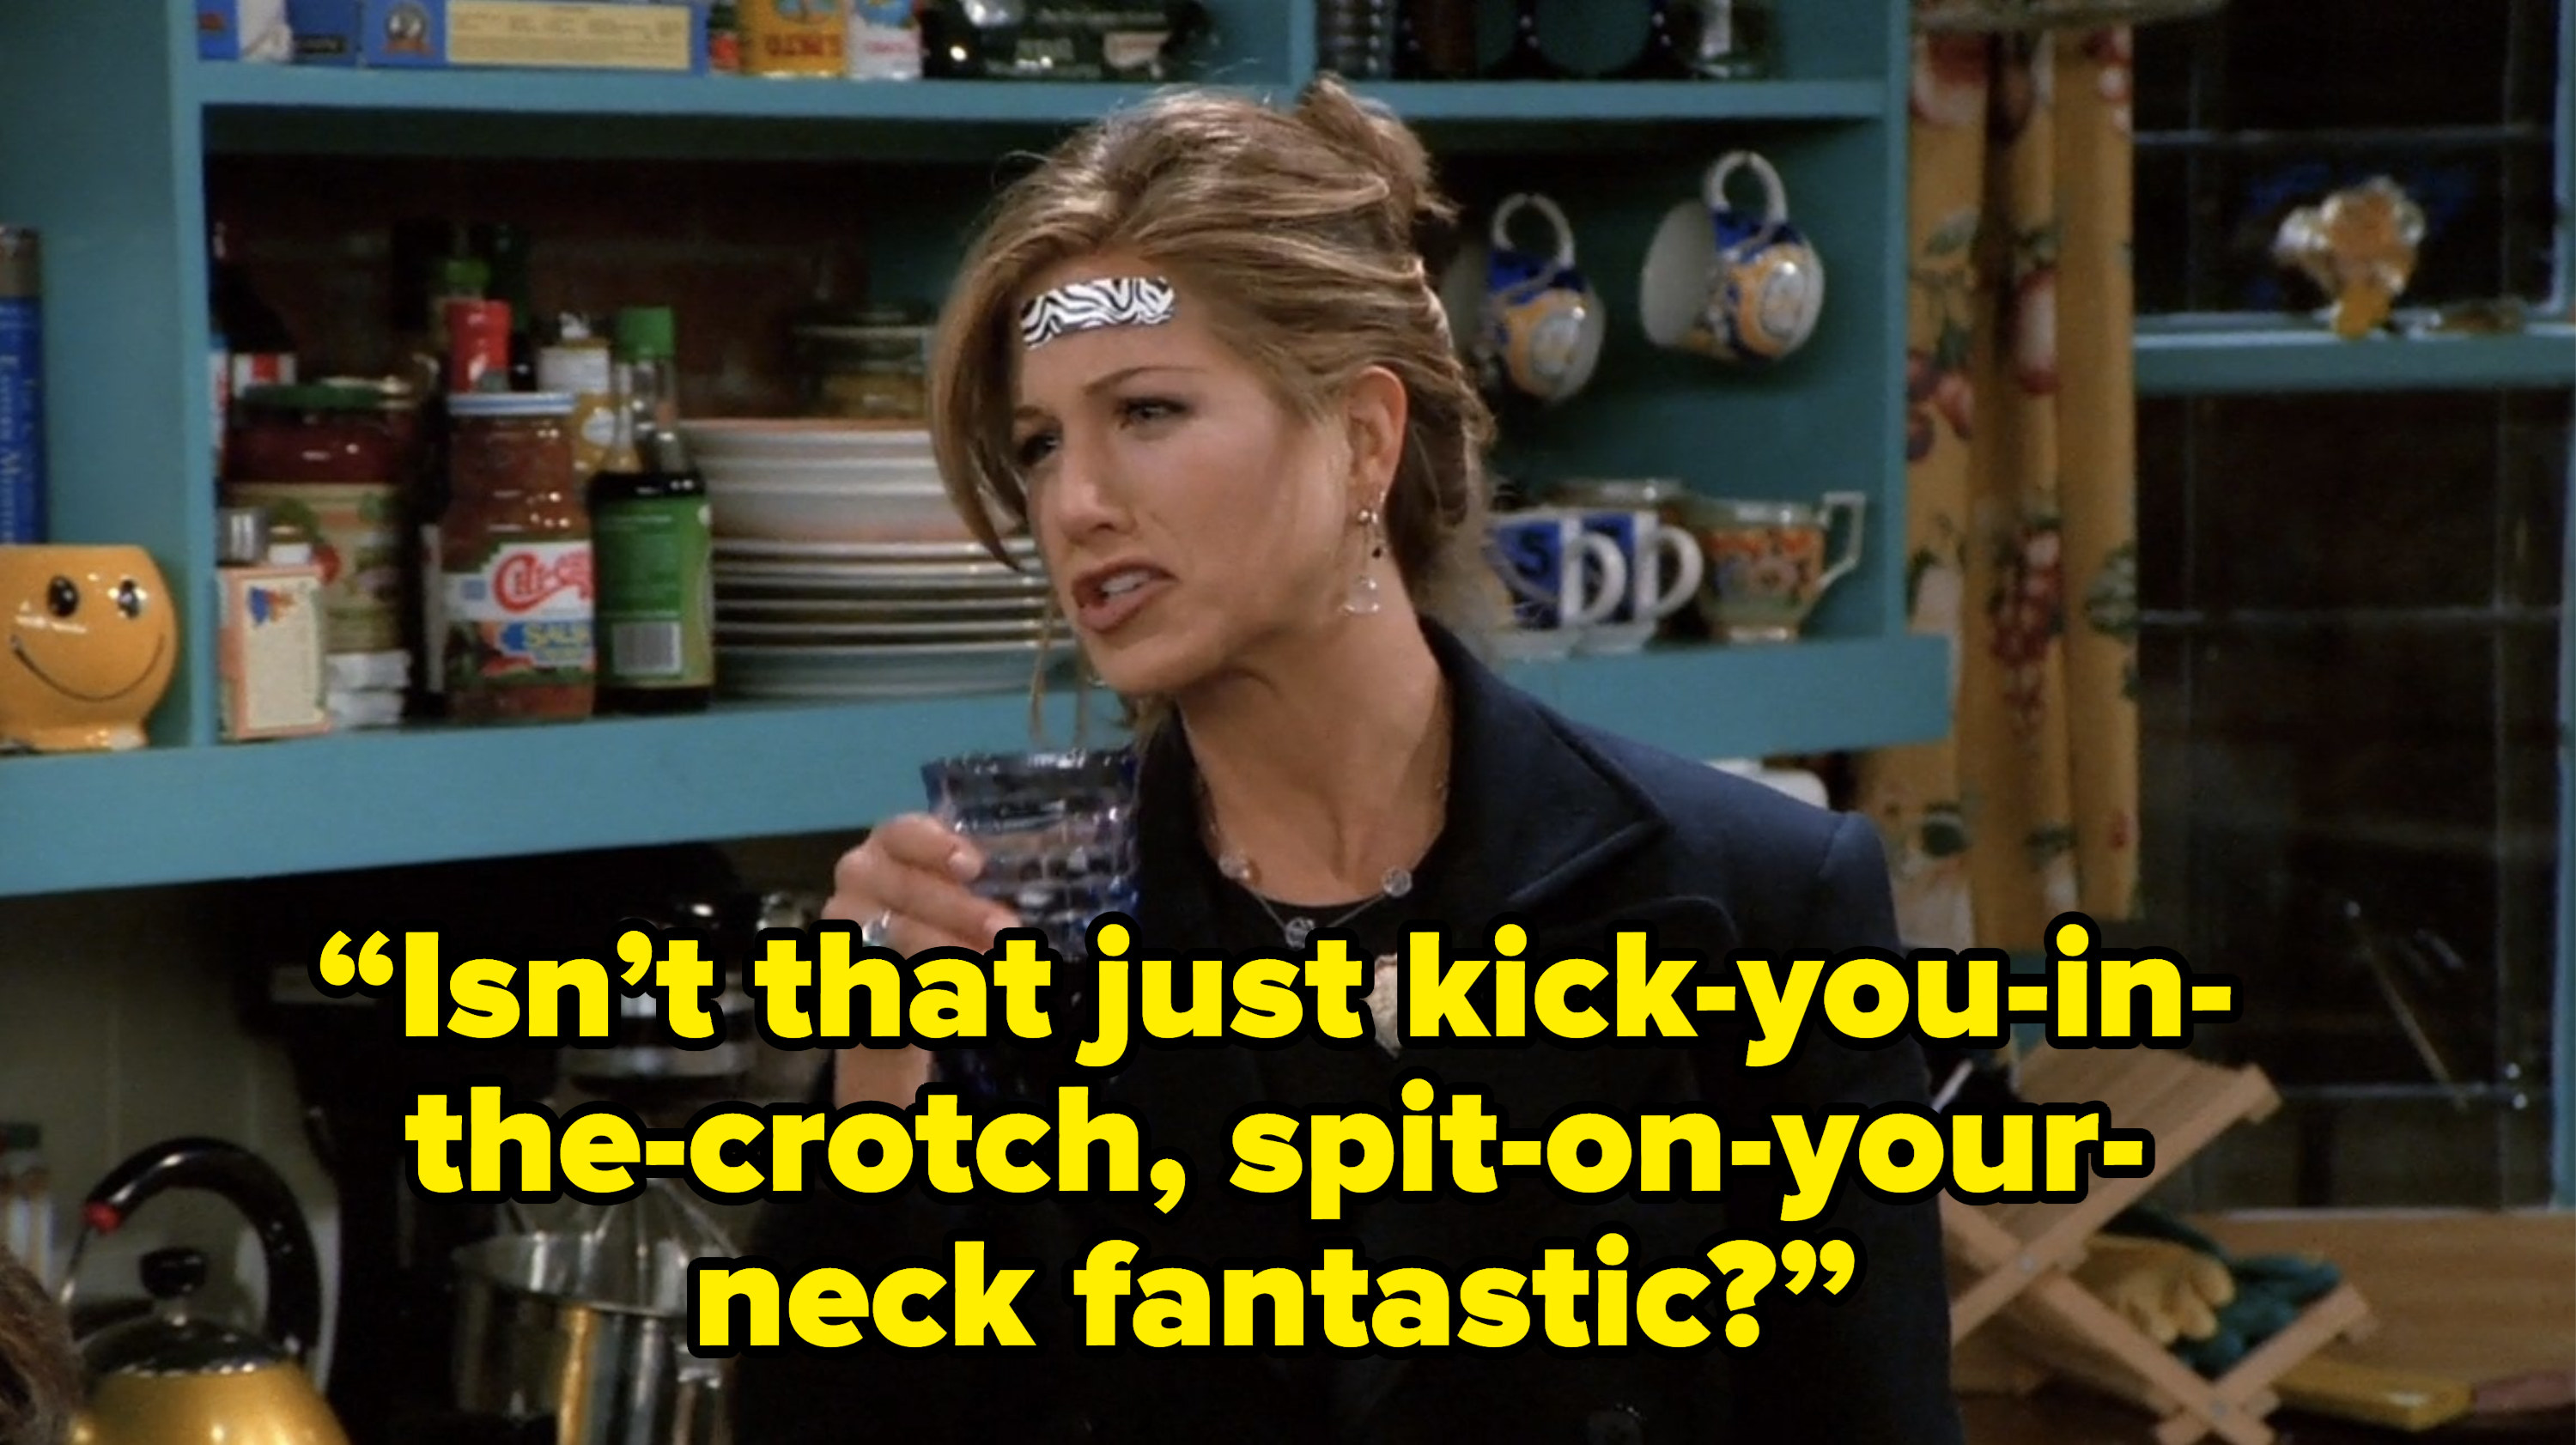 rachel saying “Isn’t that just kick-you-in-the-crotch, spit-on-your-neck fantastic?” on friends